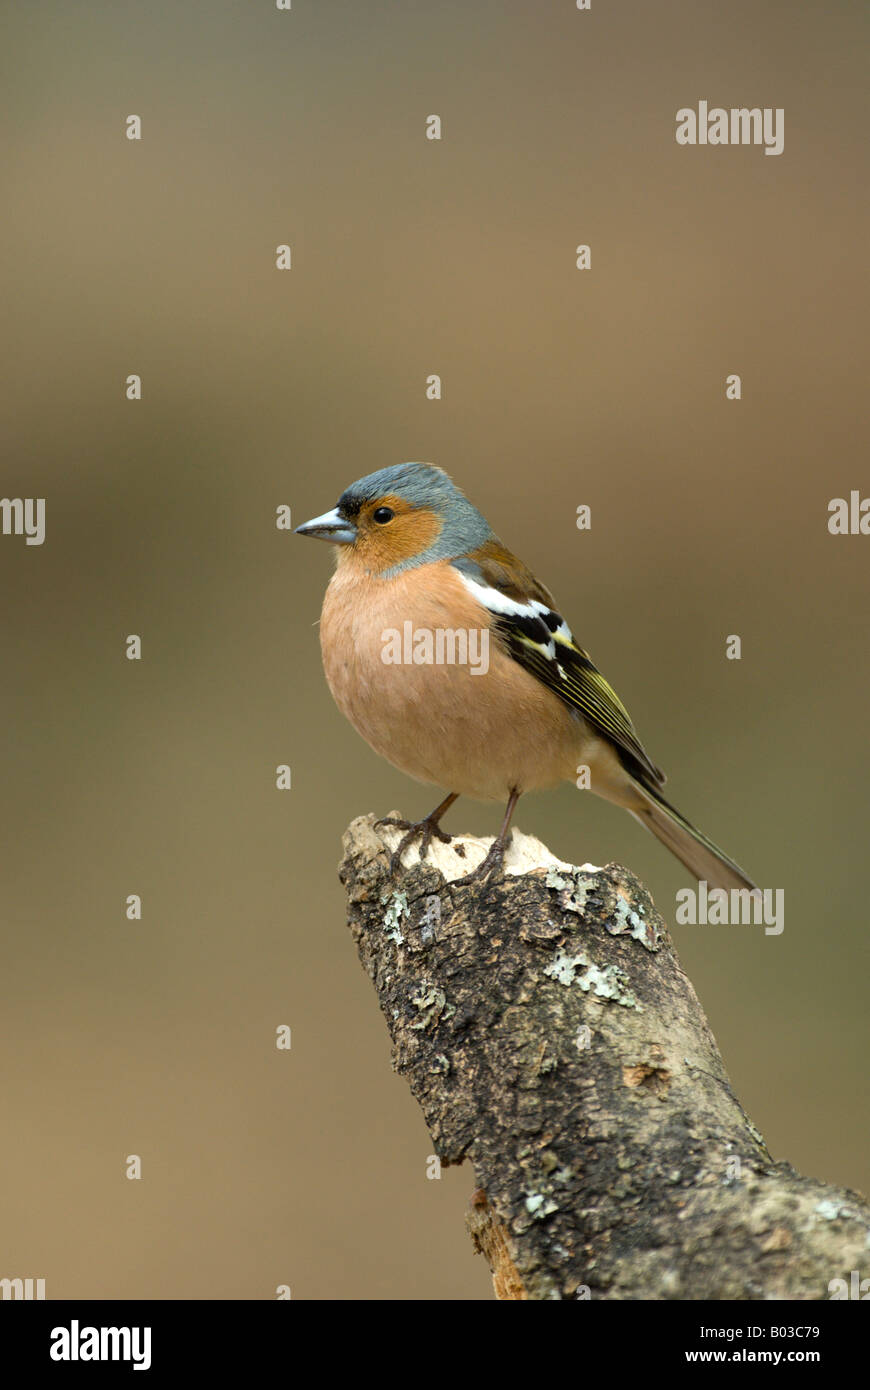 Chaffinch perched on stump Stock Photo